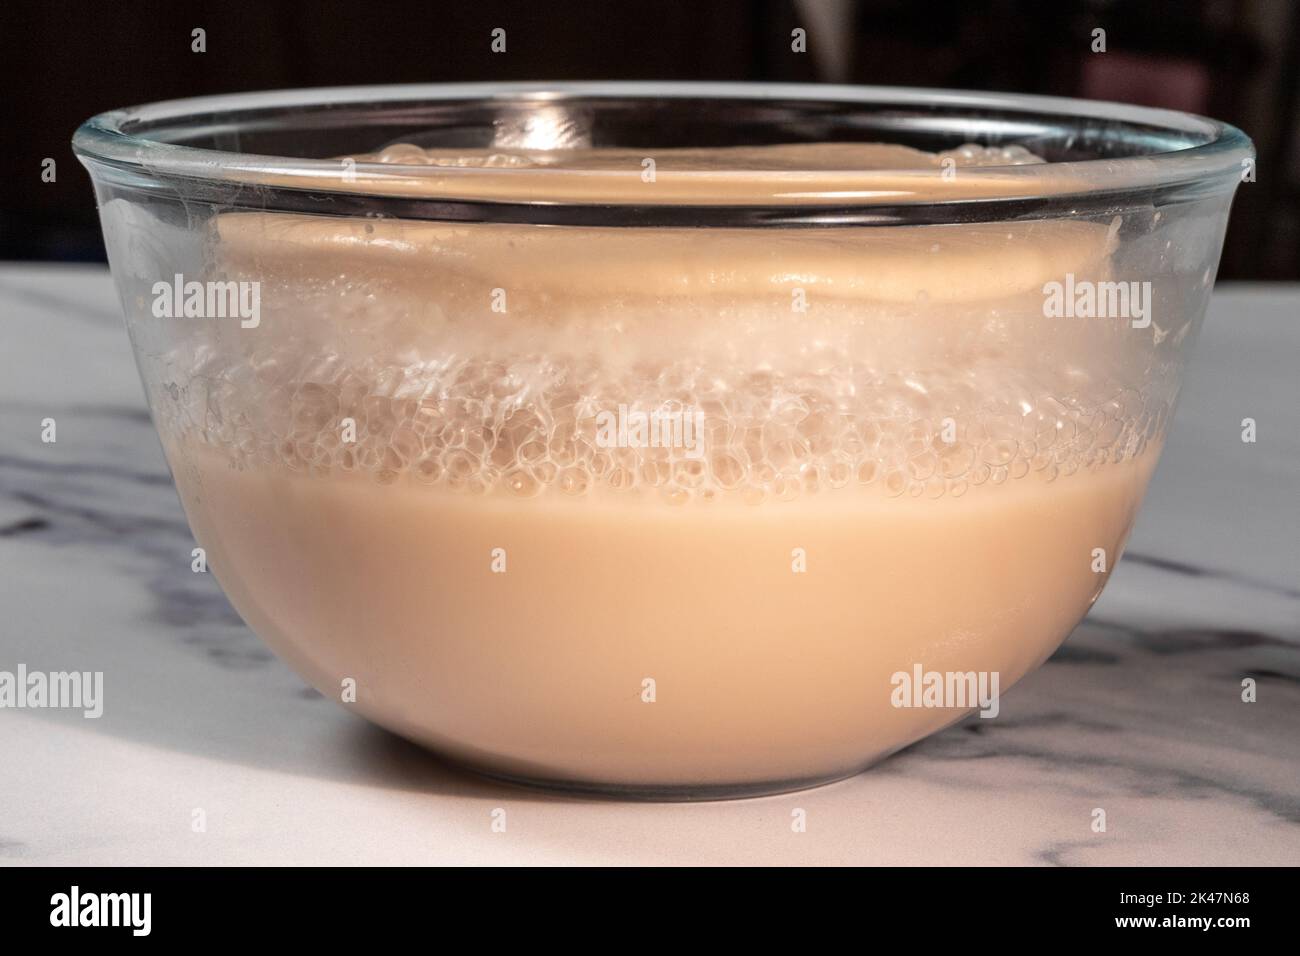 fermenting bread yeast in glass bowl from side Stock Photo